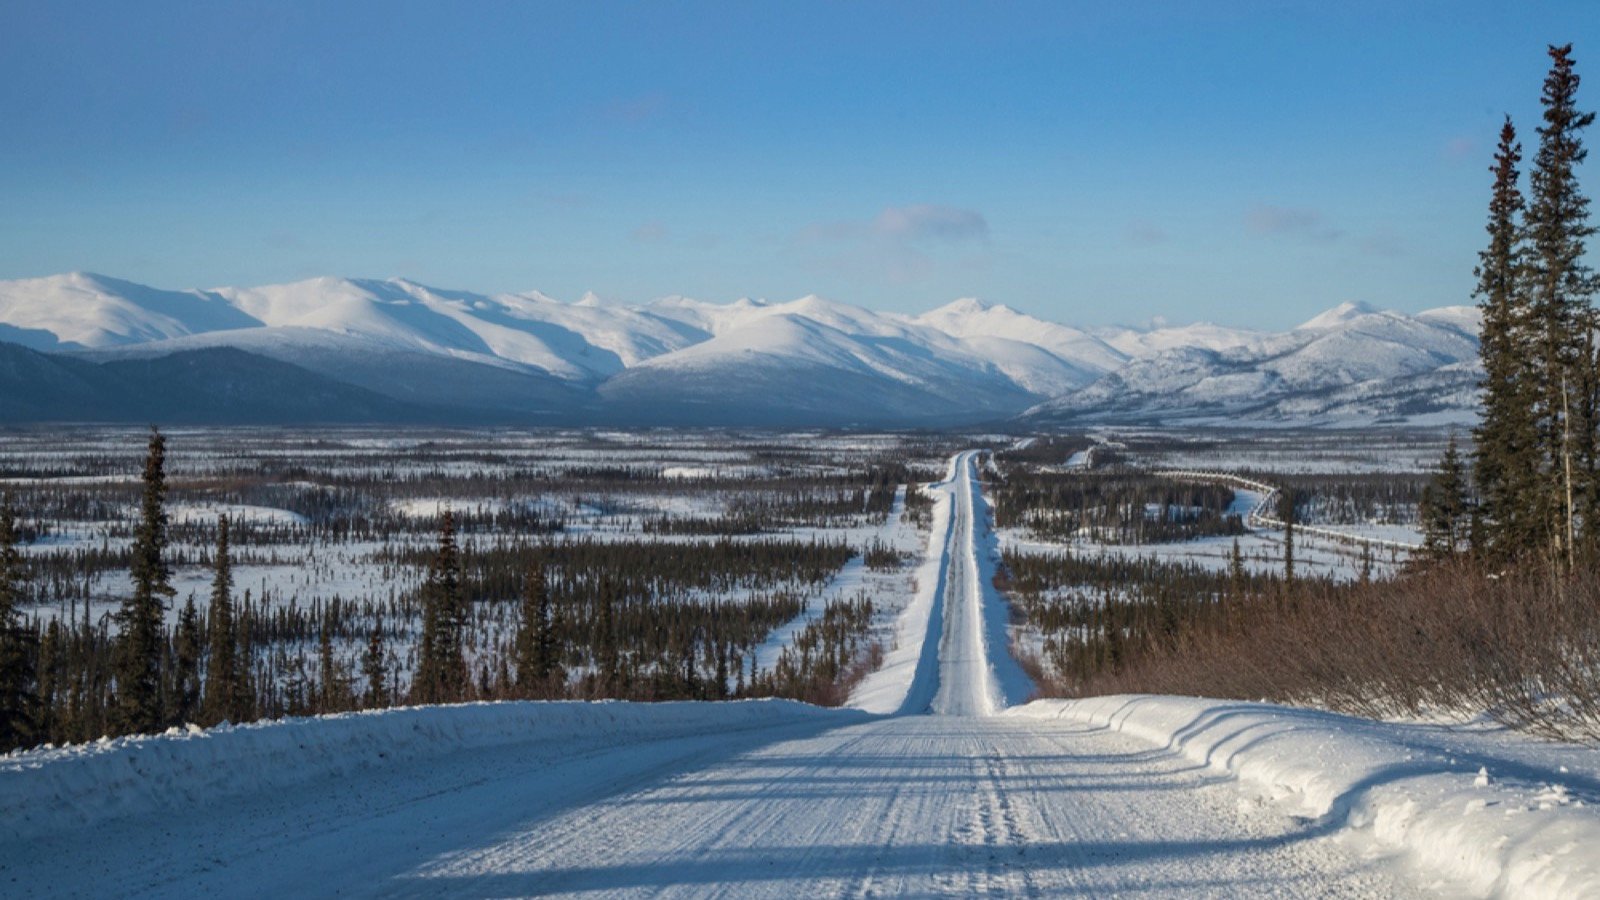 <p>Explore one of the most remote roads in northern Alaska for a real road trip adventure. Get ready to spot moose and grizzly bears while driving to the Arctic Circle to witness the phenomenon of the midnight sun during the summer months or to catch a glimpse of the Northern Lights during the winter.</p><p>Along the way, stop at some famous eateries such as Yukon River Camp or the Arctic Circle Trading Post. Photo opportunities include Finger Mountain and the Gates of the Arctic National Park.</p>